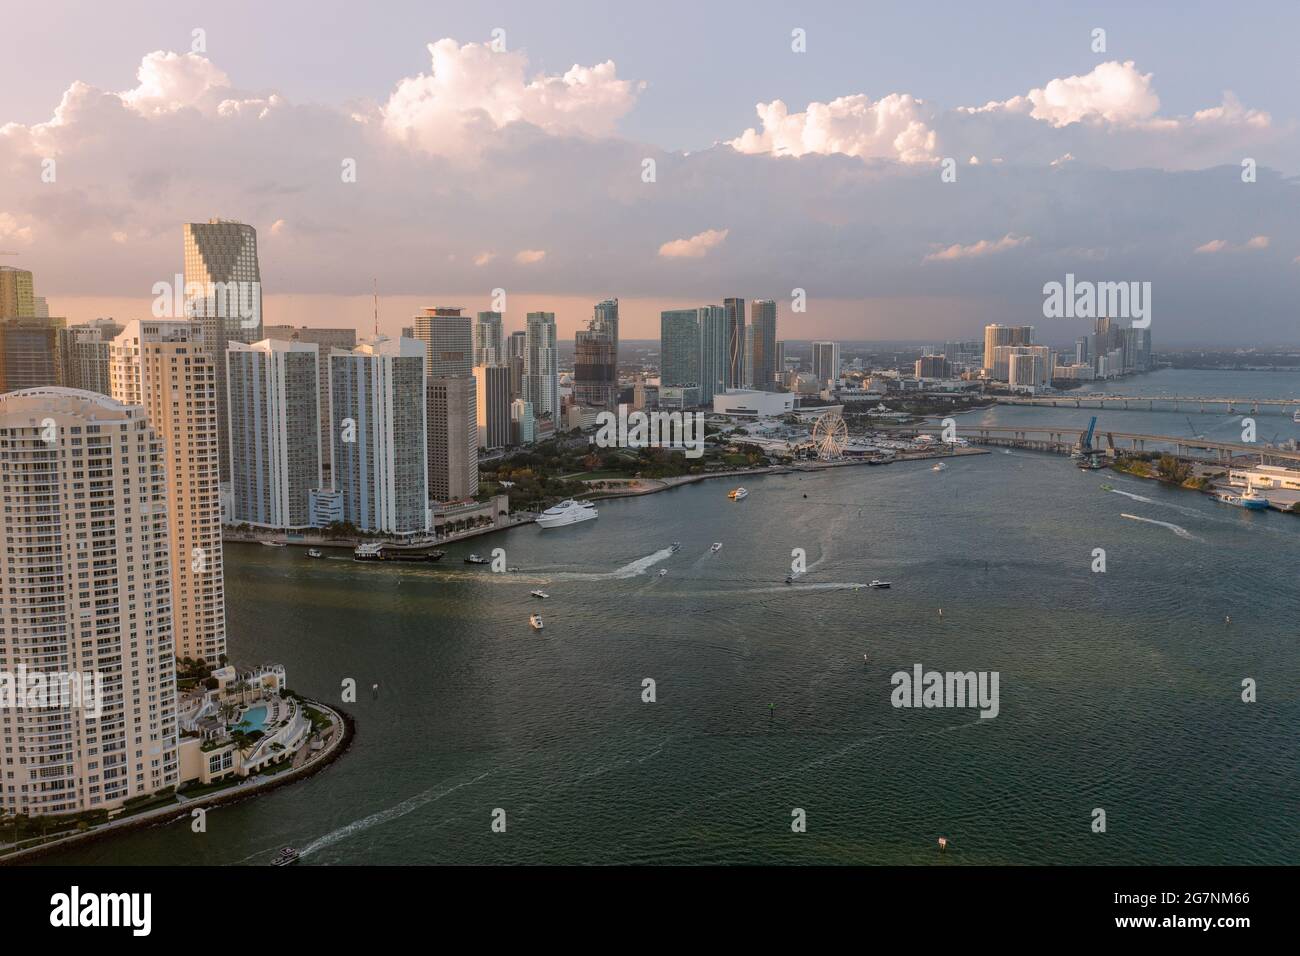 Drone Helicopter View of Miamia Beach above Highrises and Condos Stock Photo